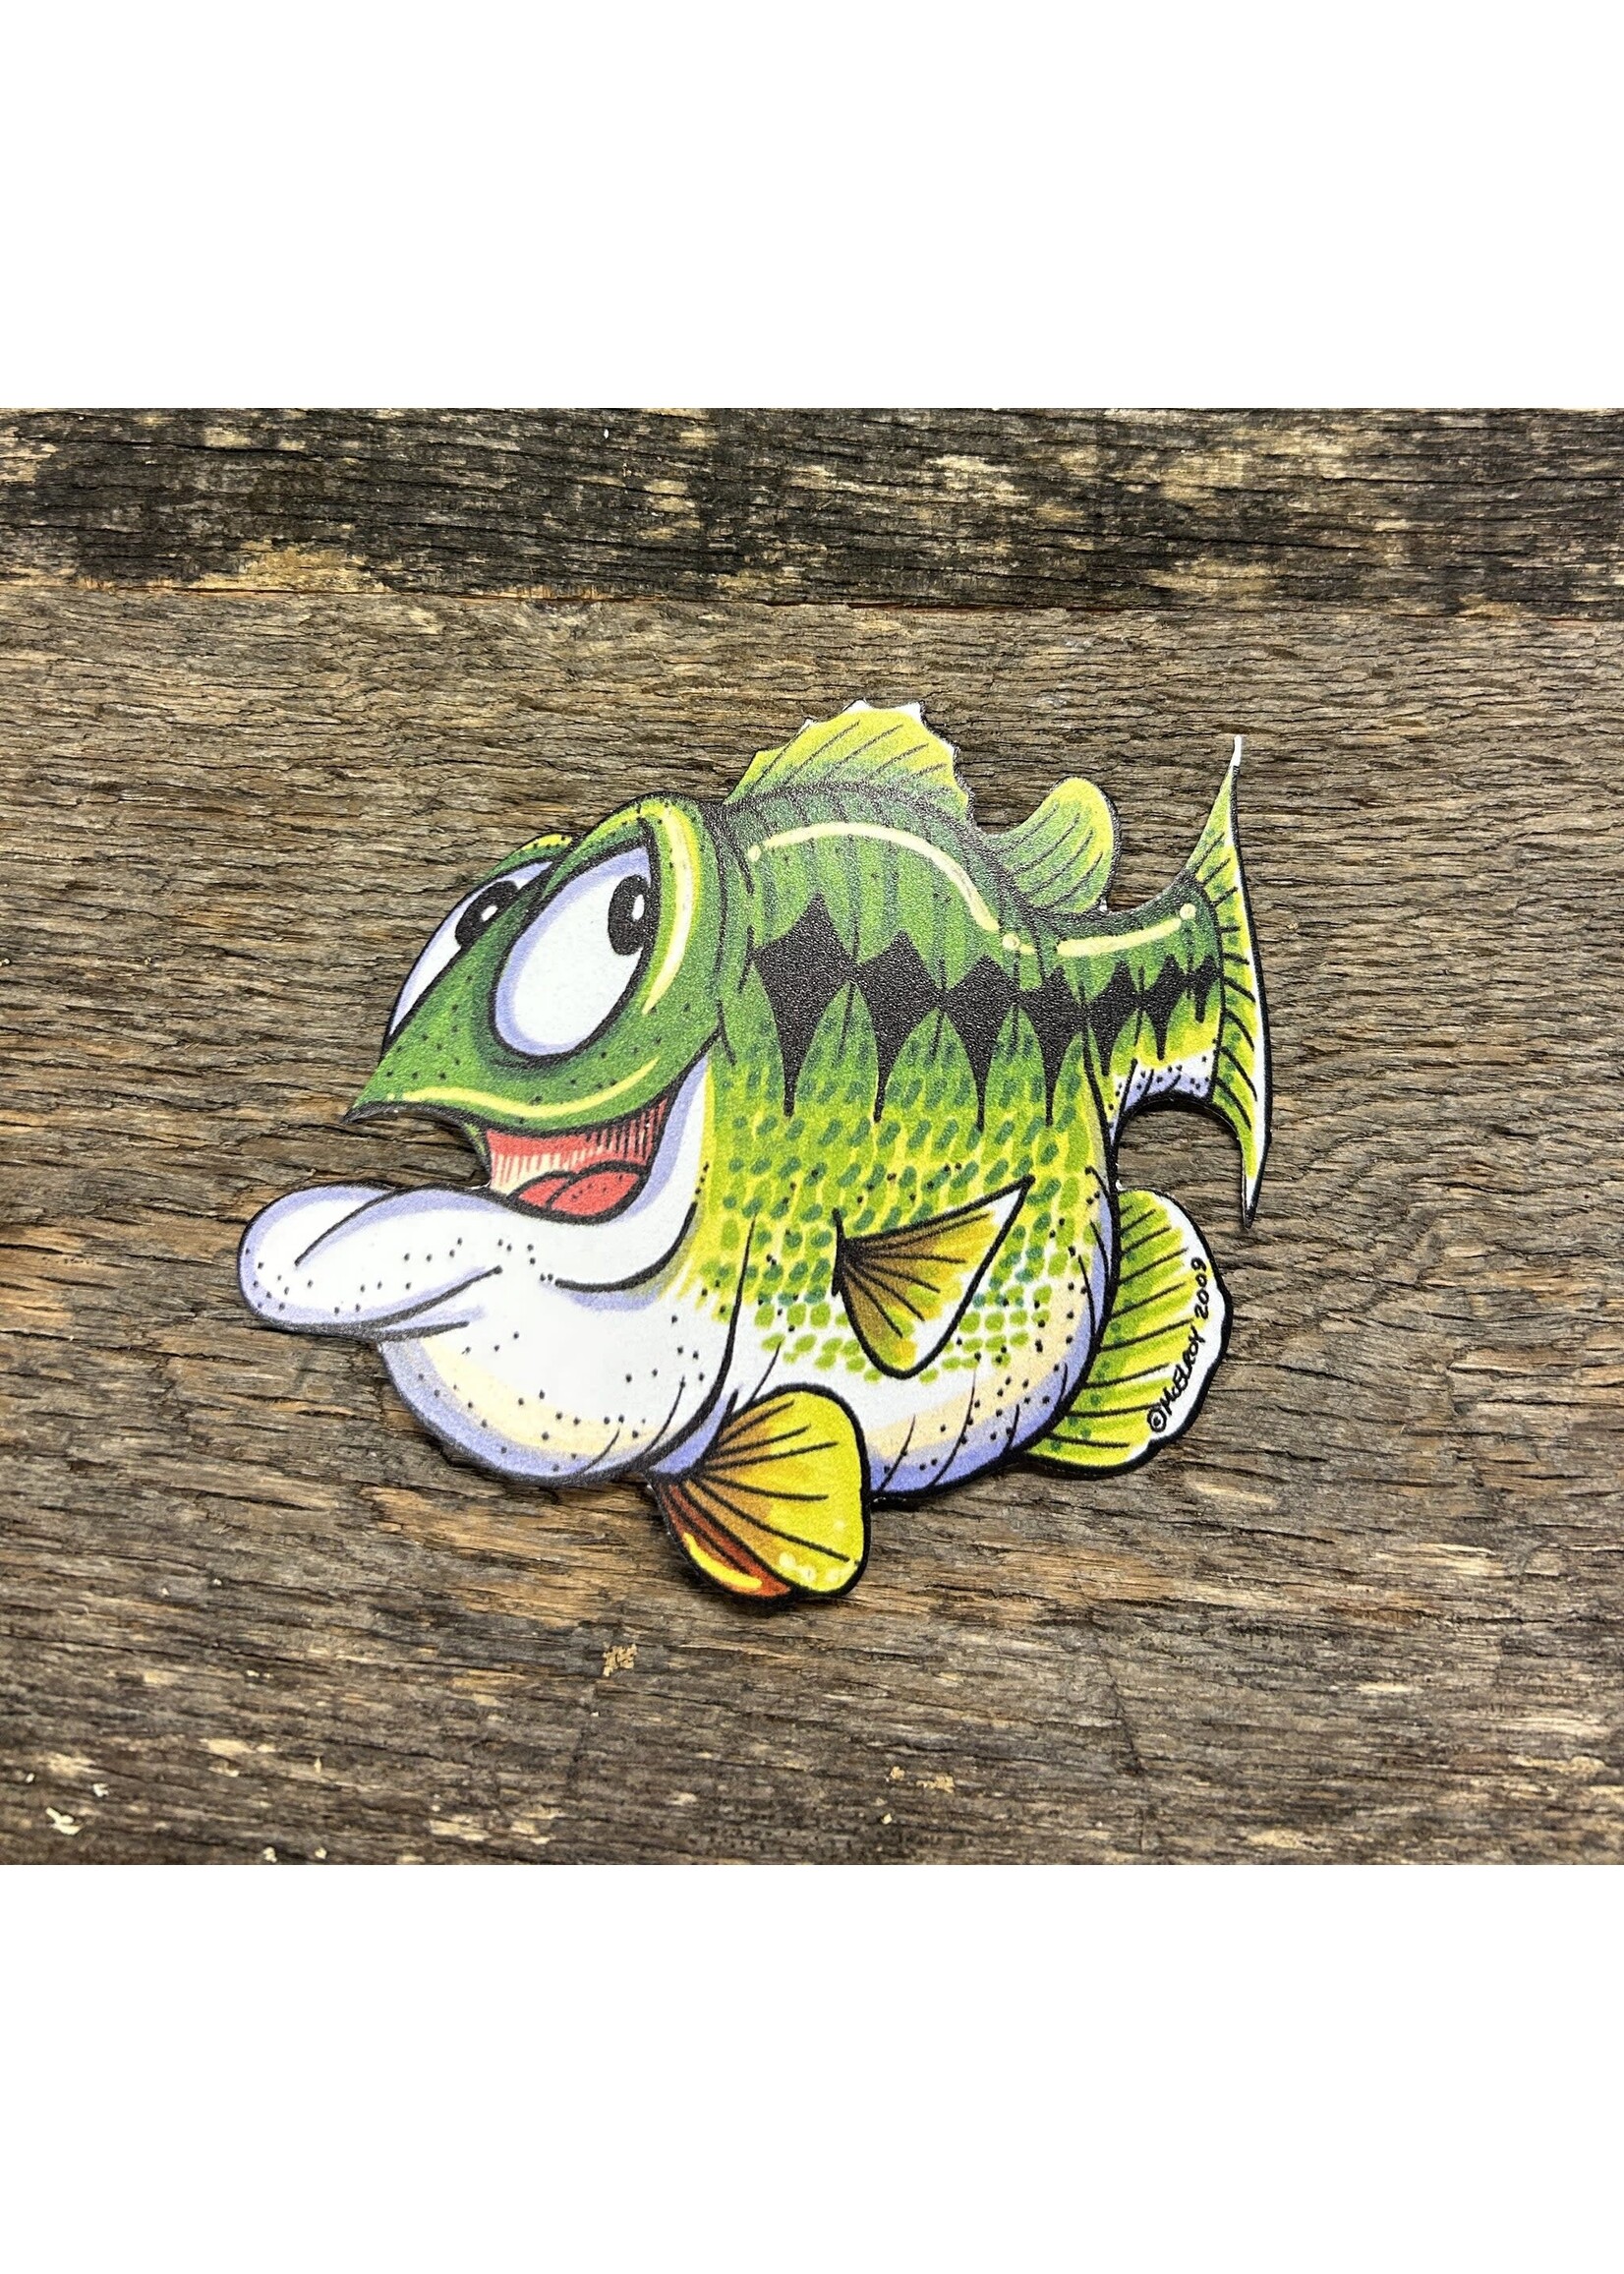 Fishing Complete Happy Lucky (Largemouth Bass) Decal - Tackle Shack